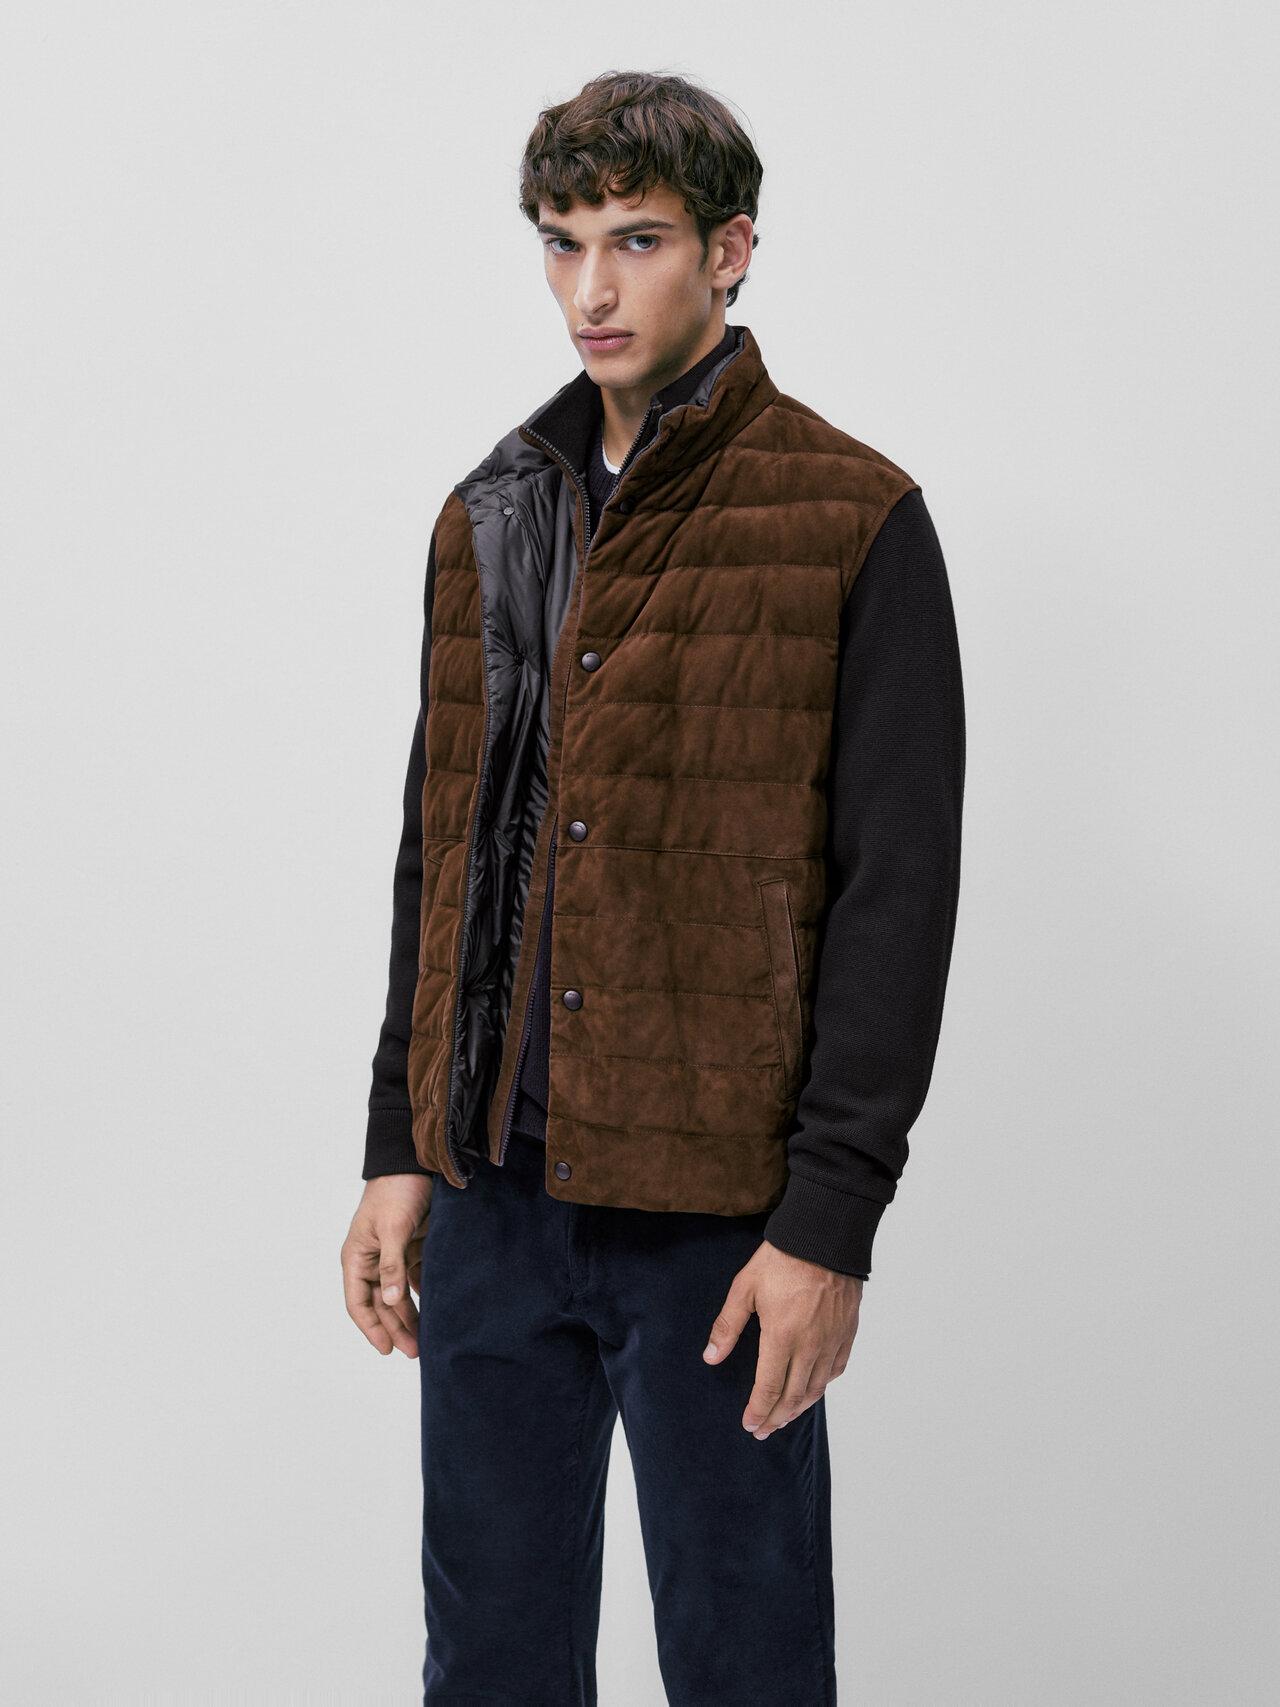 MASSIMO DUTTI Contrast Suede And Knit Jacket in Brown for Men | Lyst